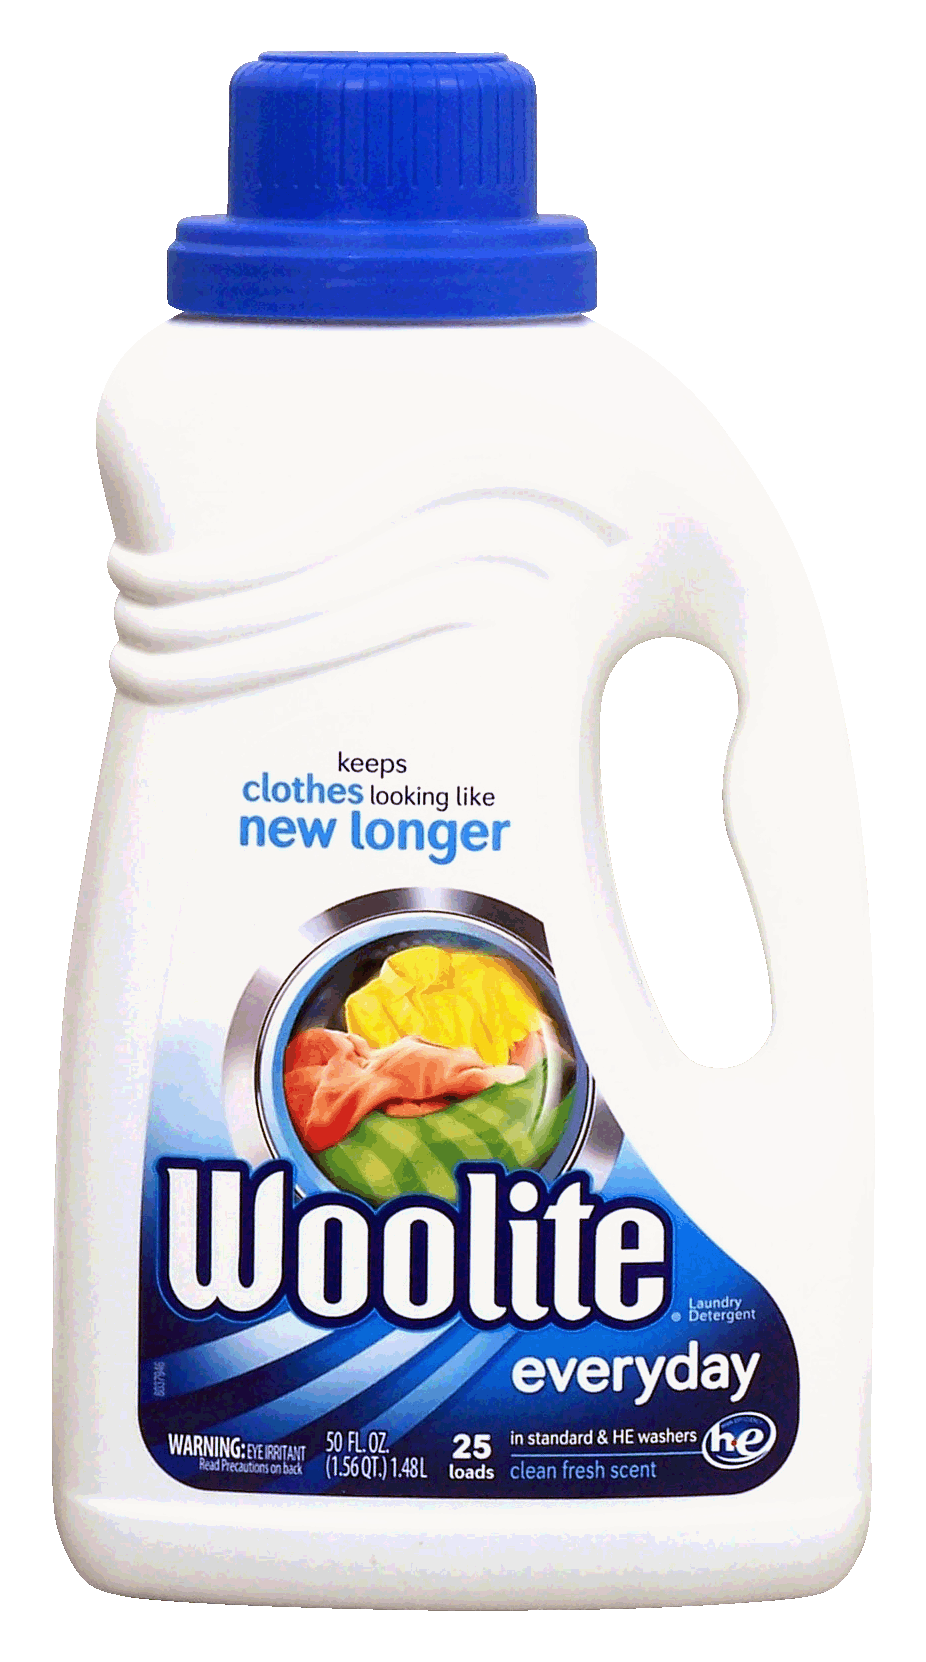 Woolite  laundry detergent, for standard & h.e. washers, clean fresh scent, 25 loads Full-Size Picture